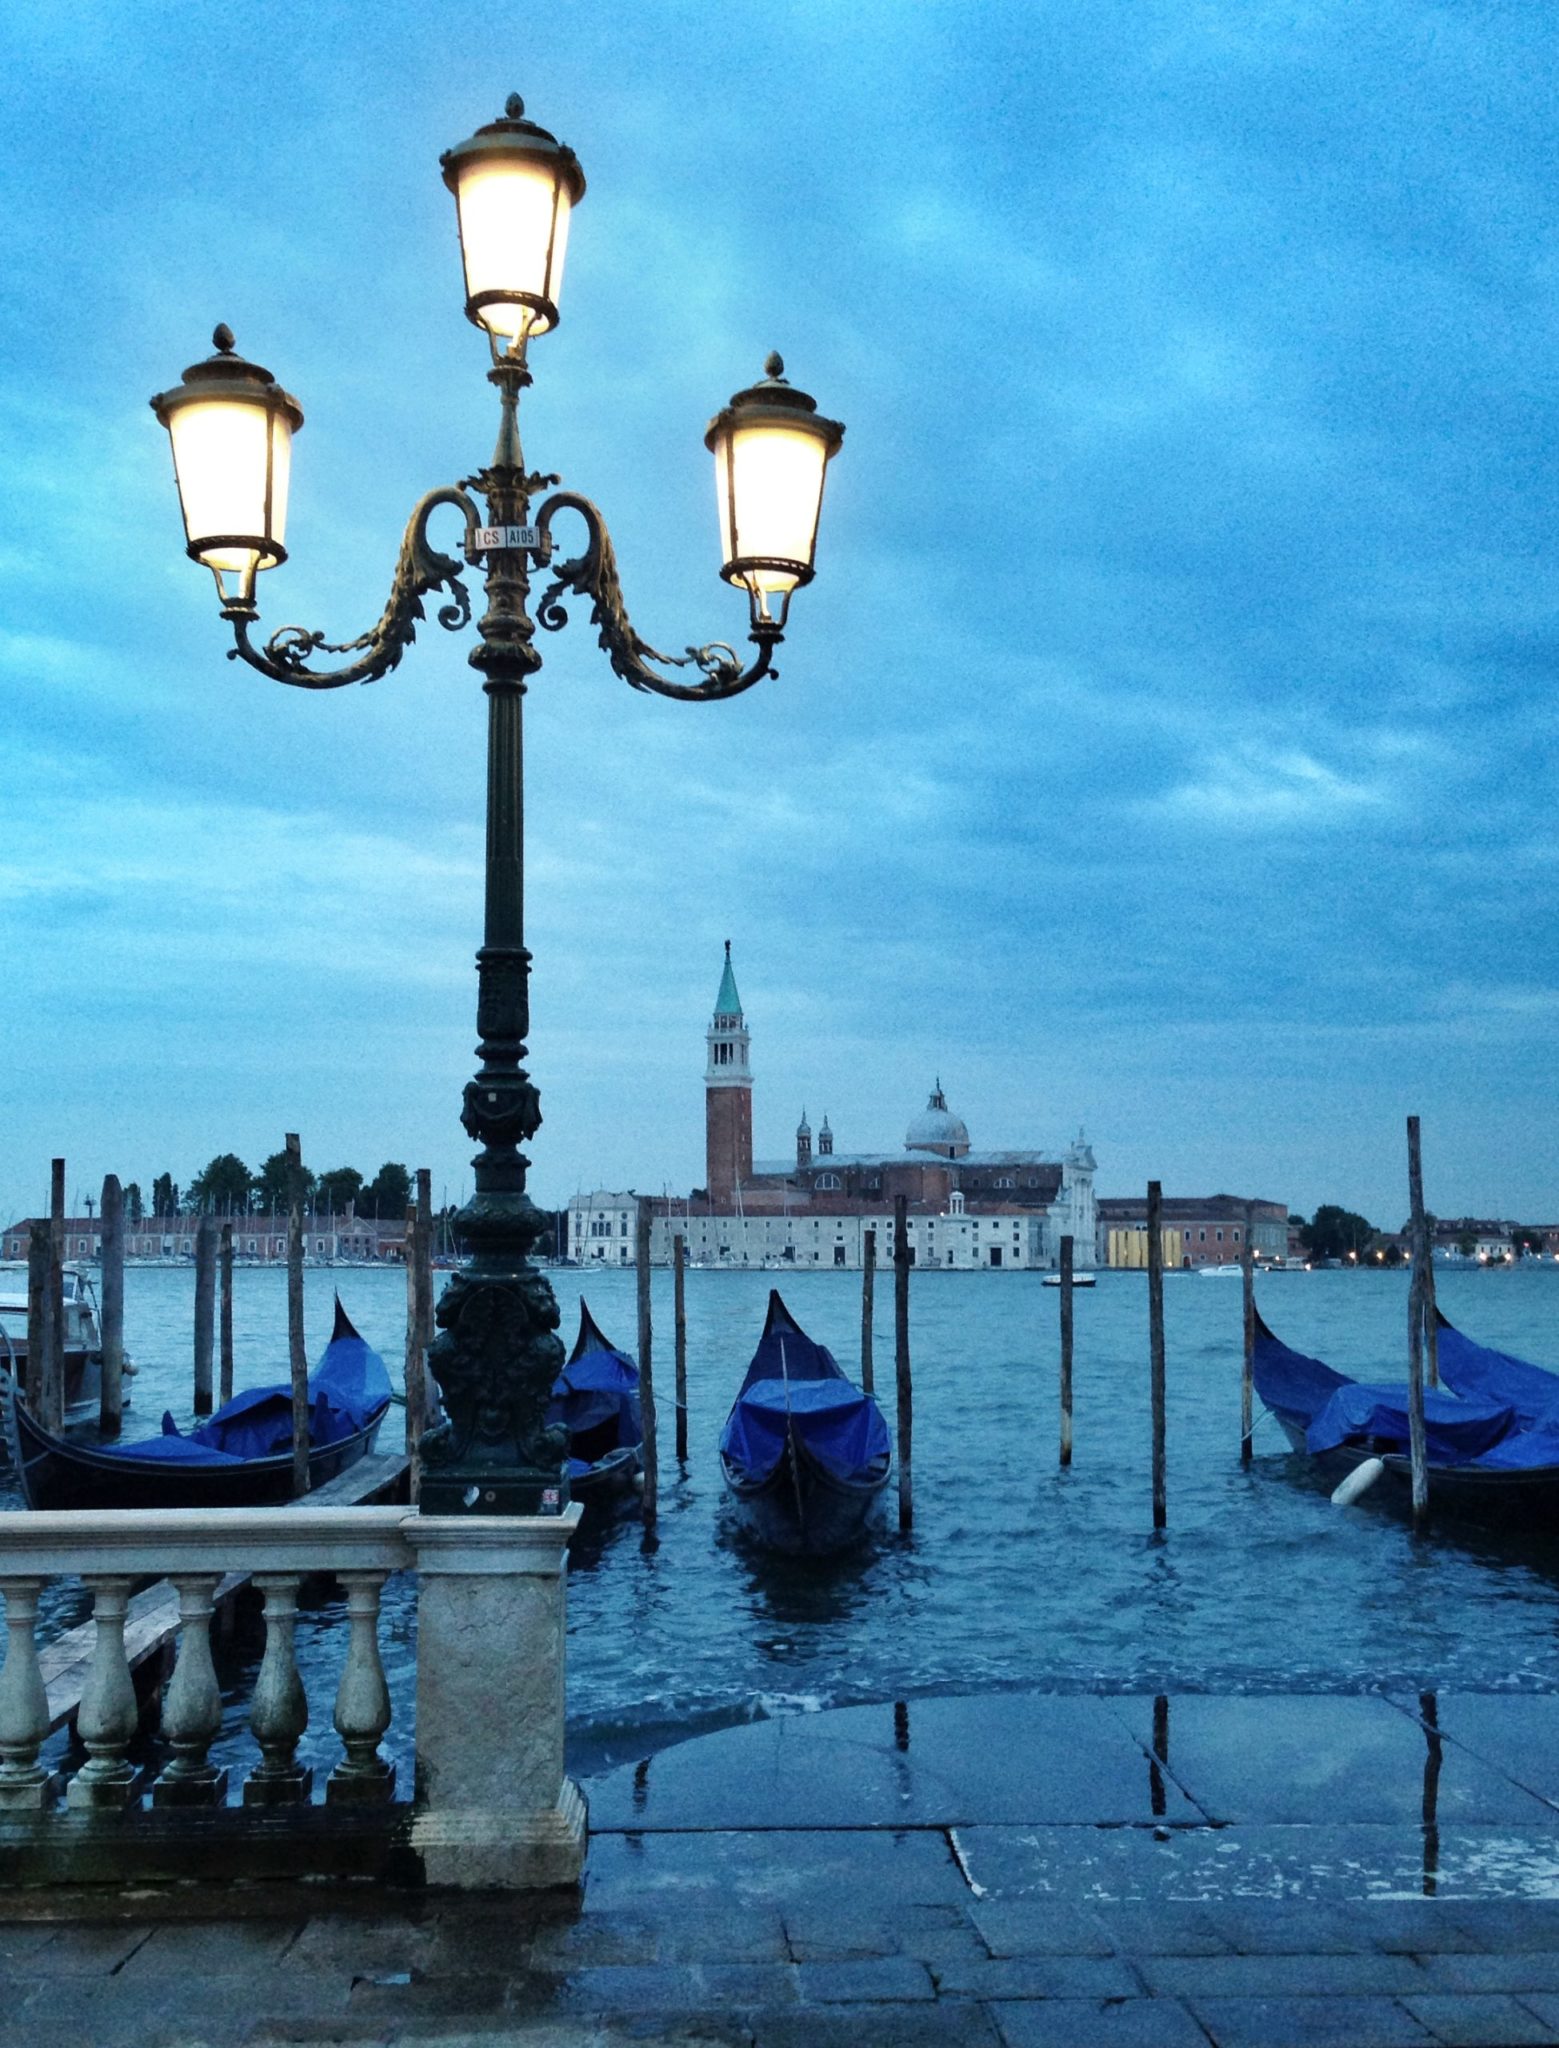 Visiting Venice, Italy – arriving in style by water taxi